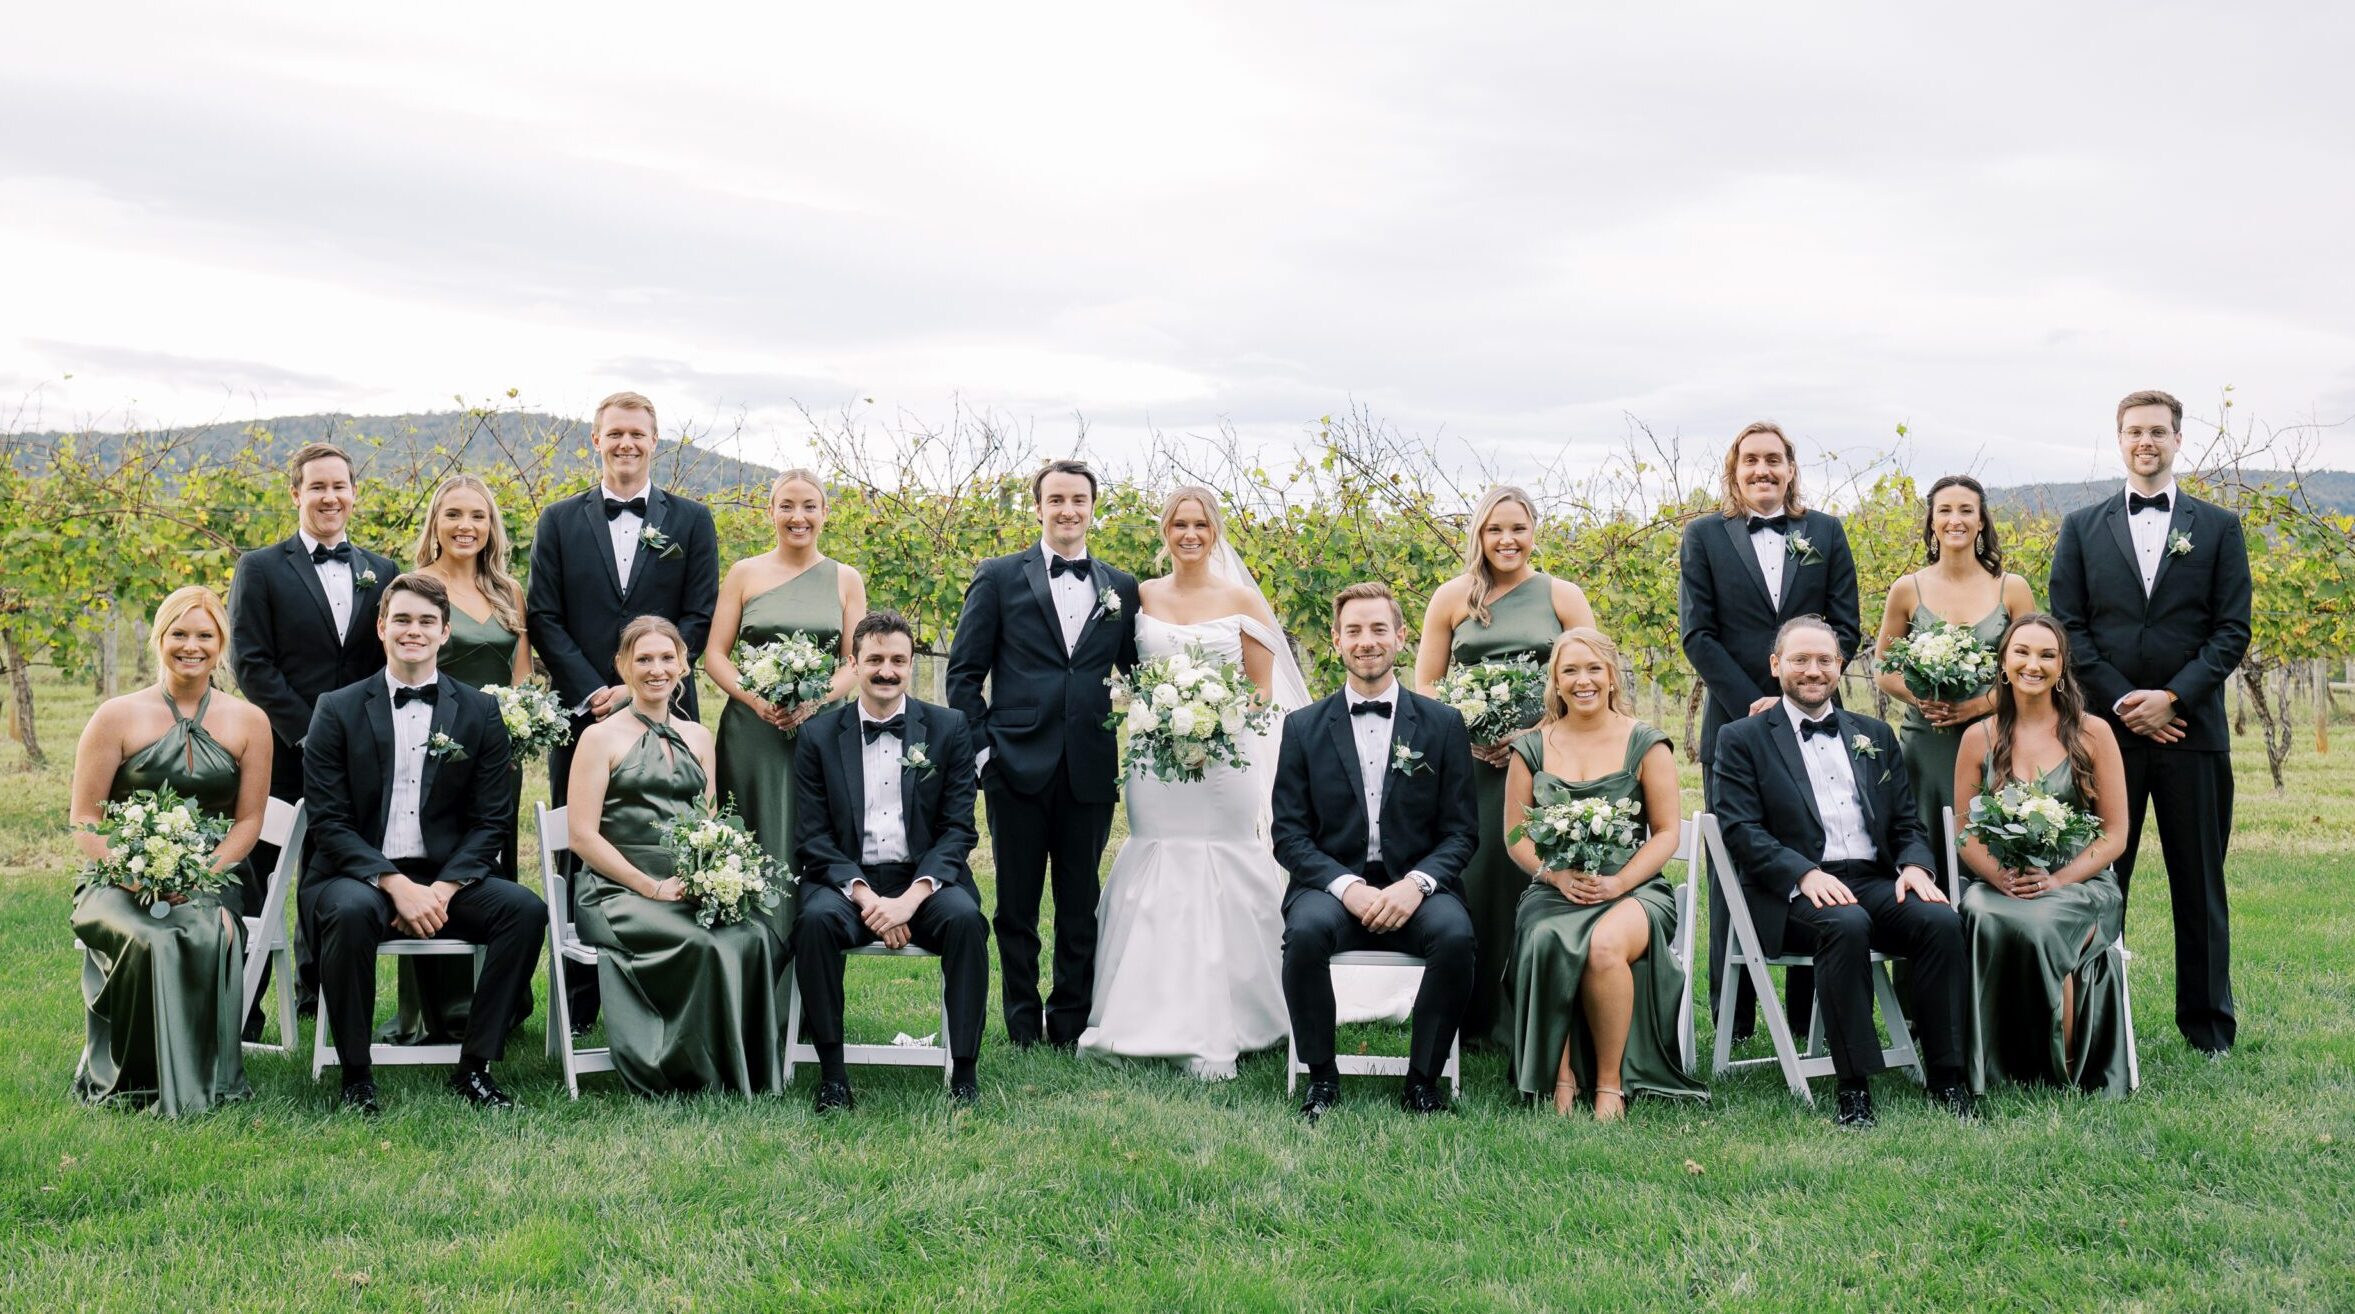 Group wedding party photo with bridesmaids sitting down in green satin dresses at Keswick Vineyards.